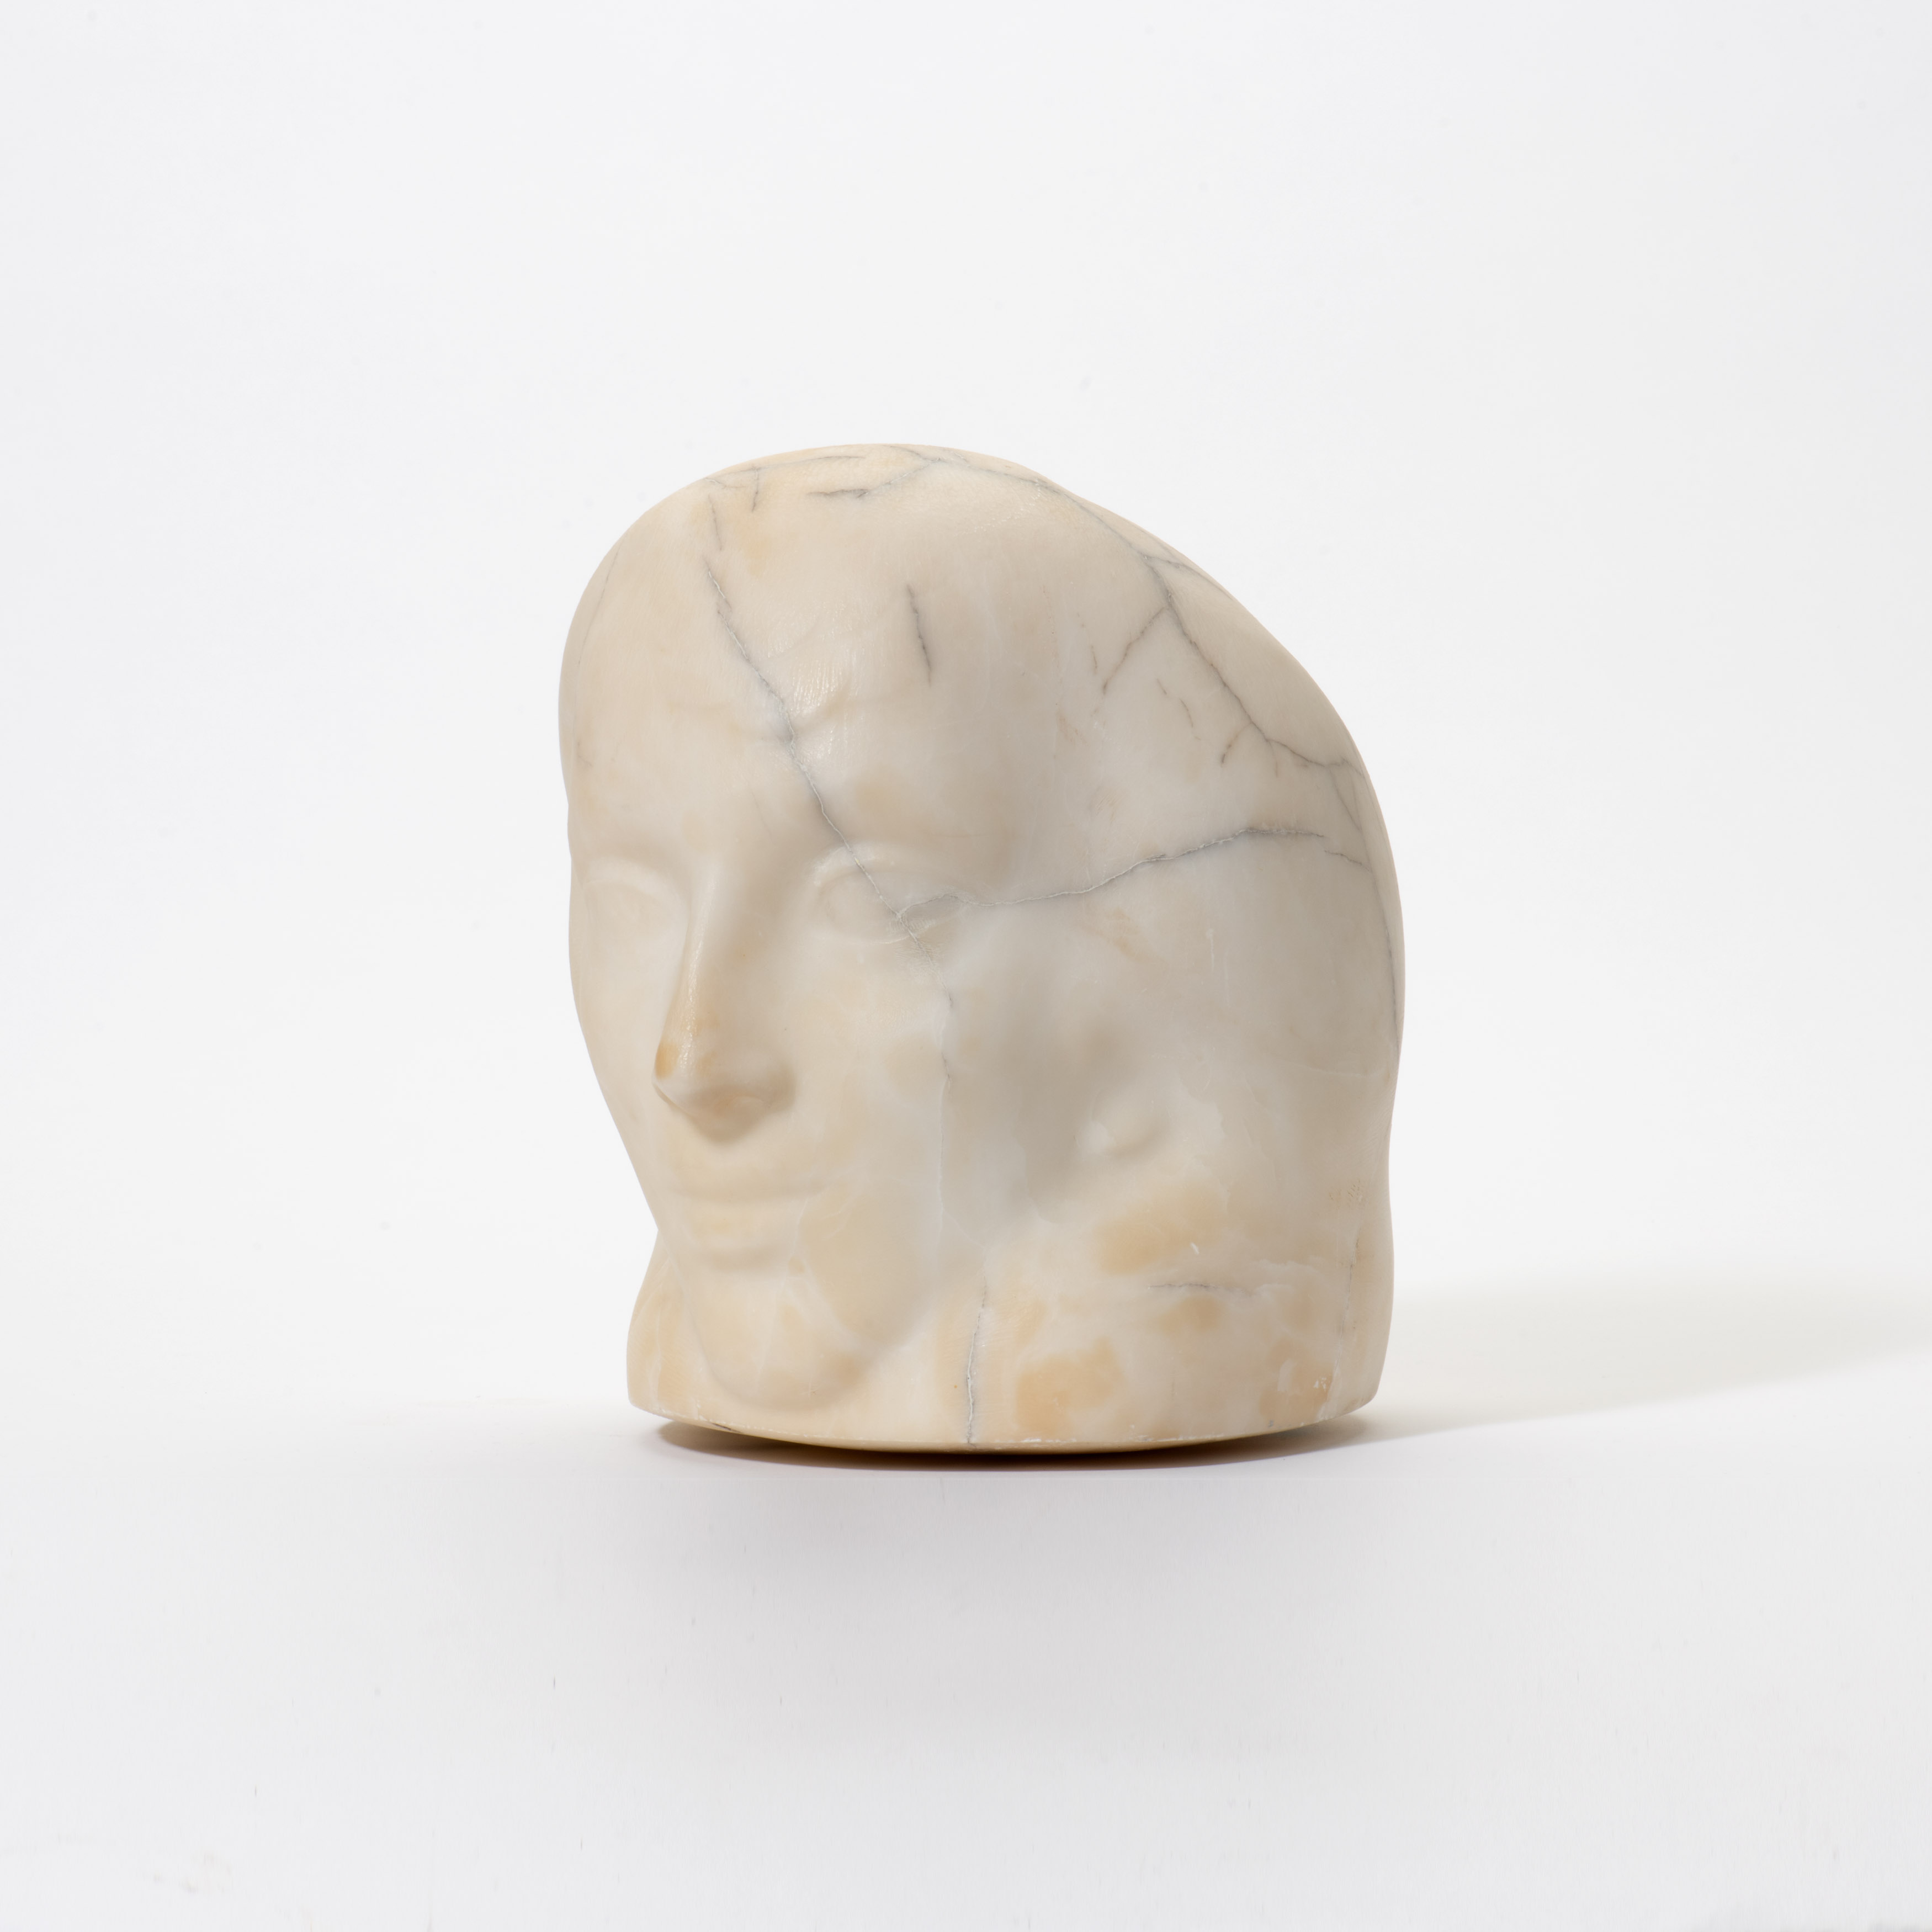 A head of a woman (c. 1950)